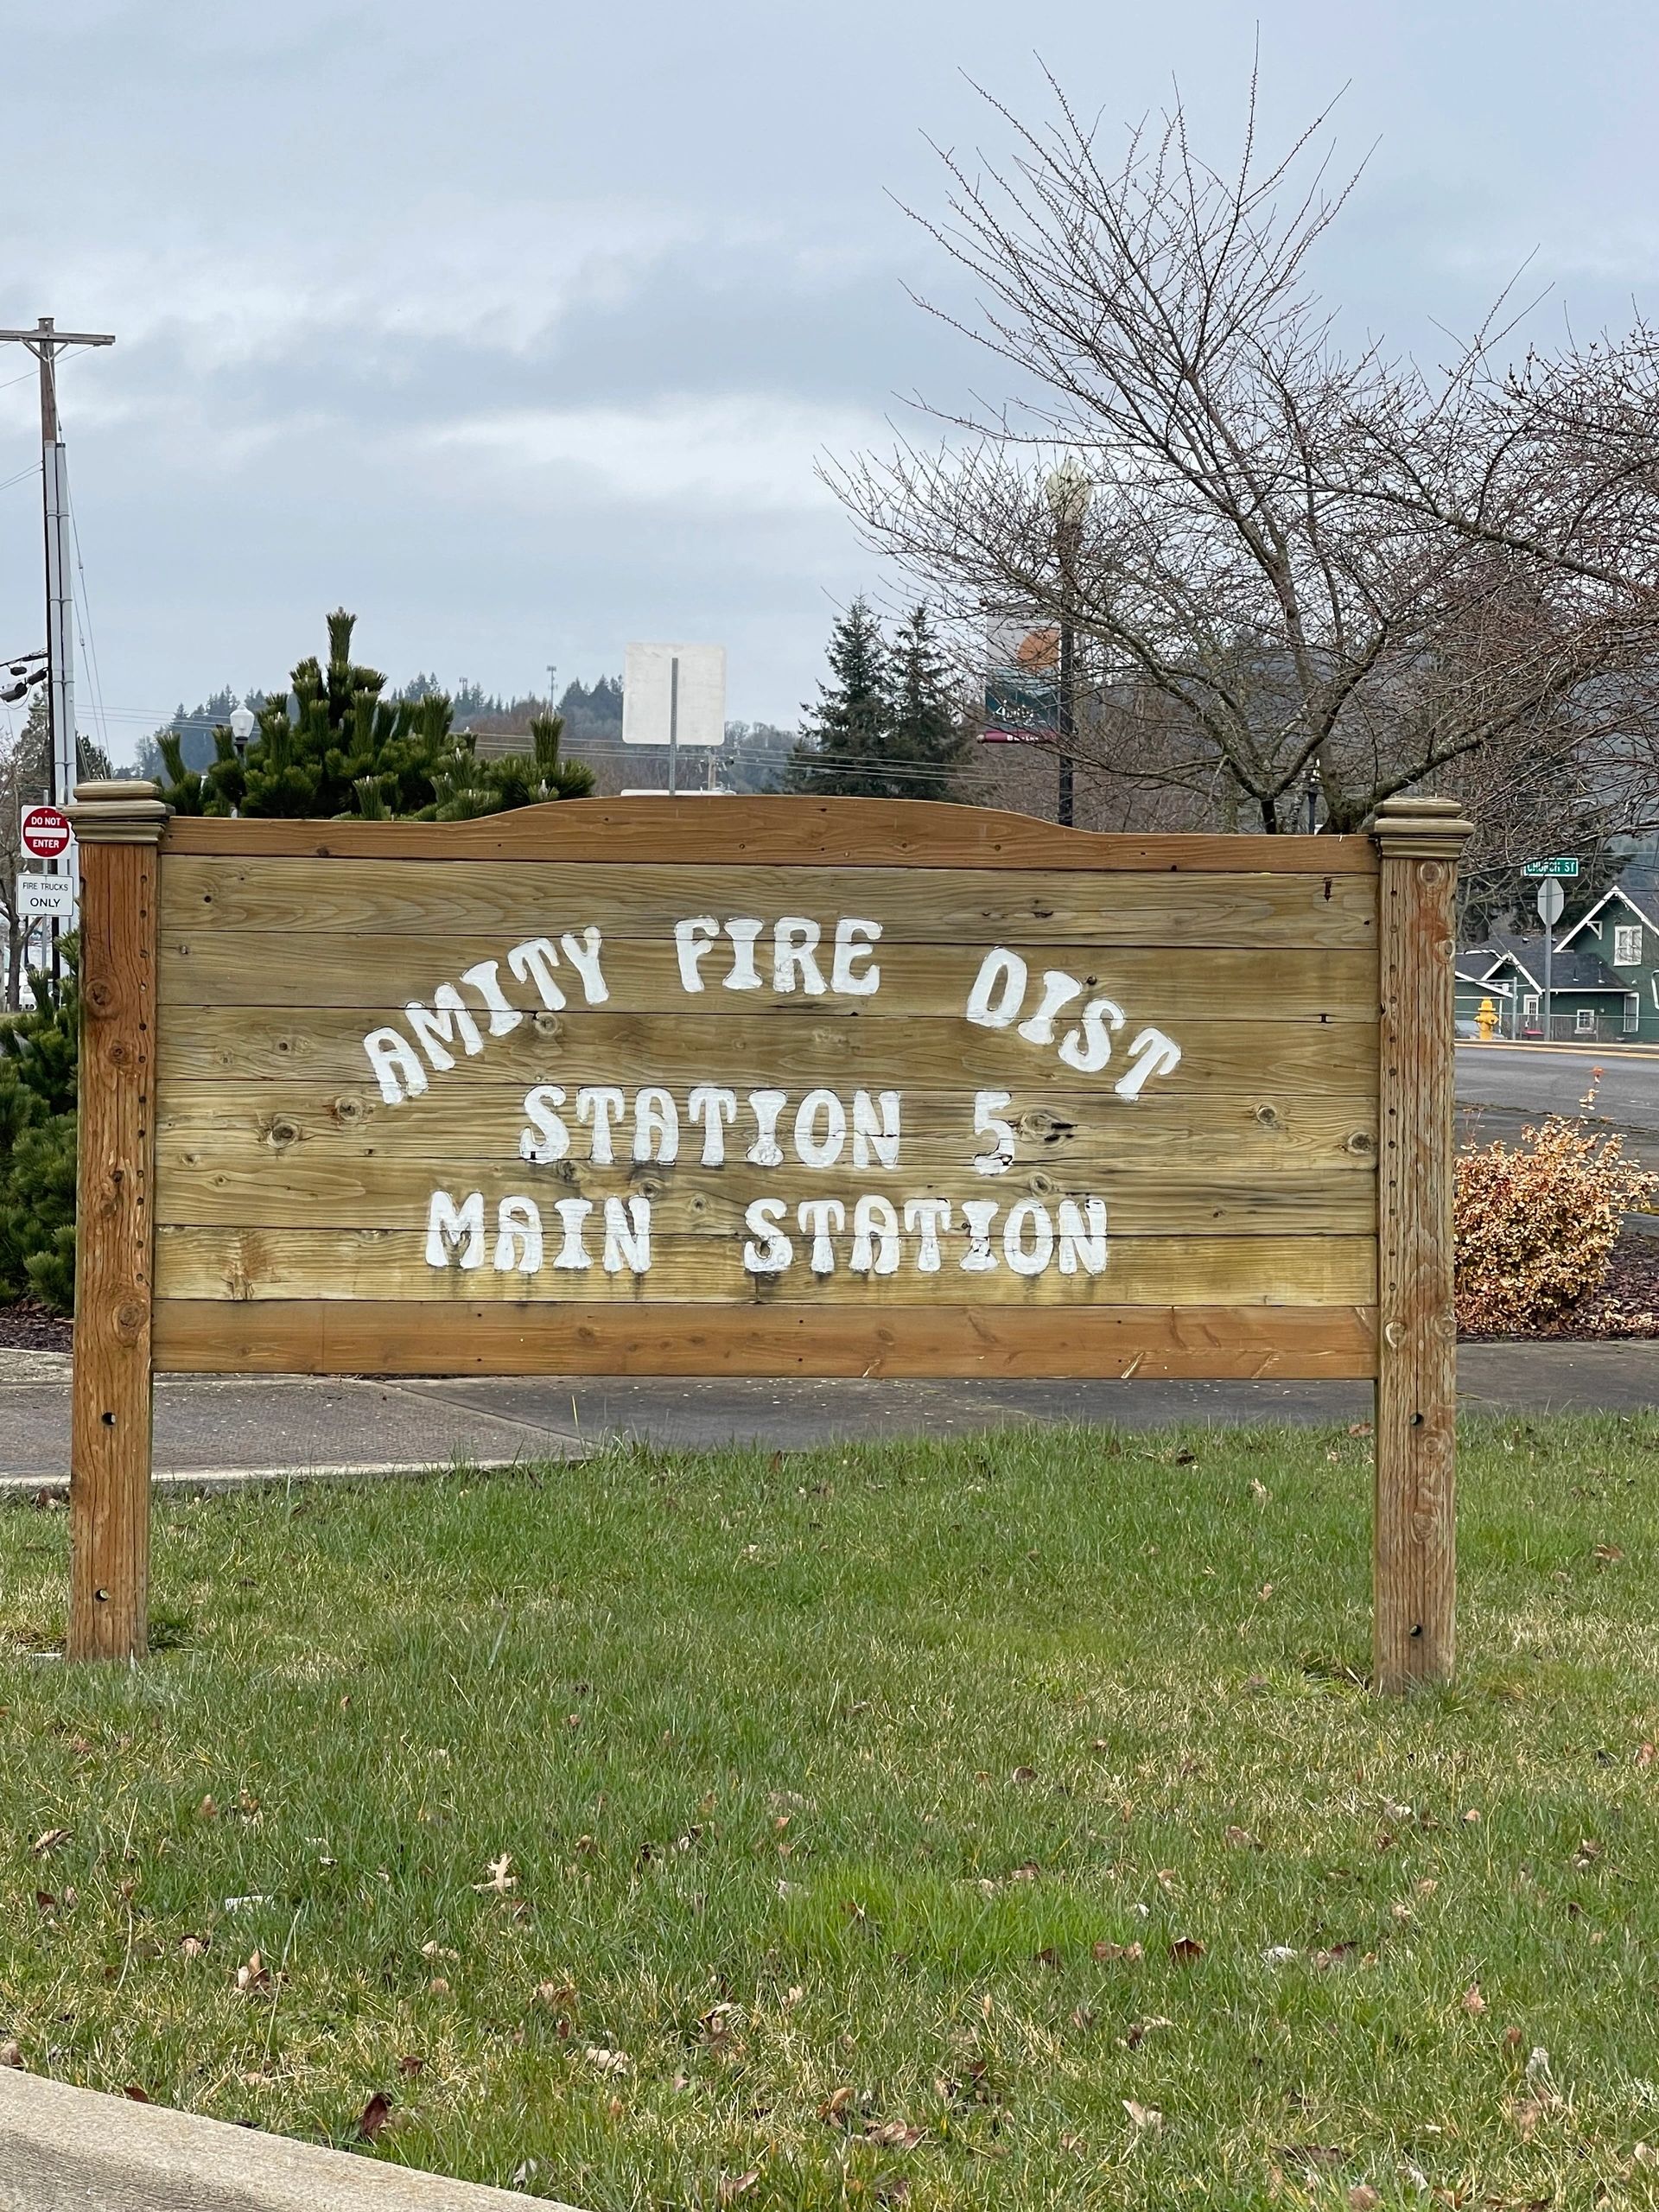 Amity Fire District 